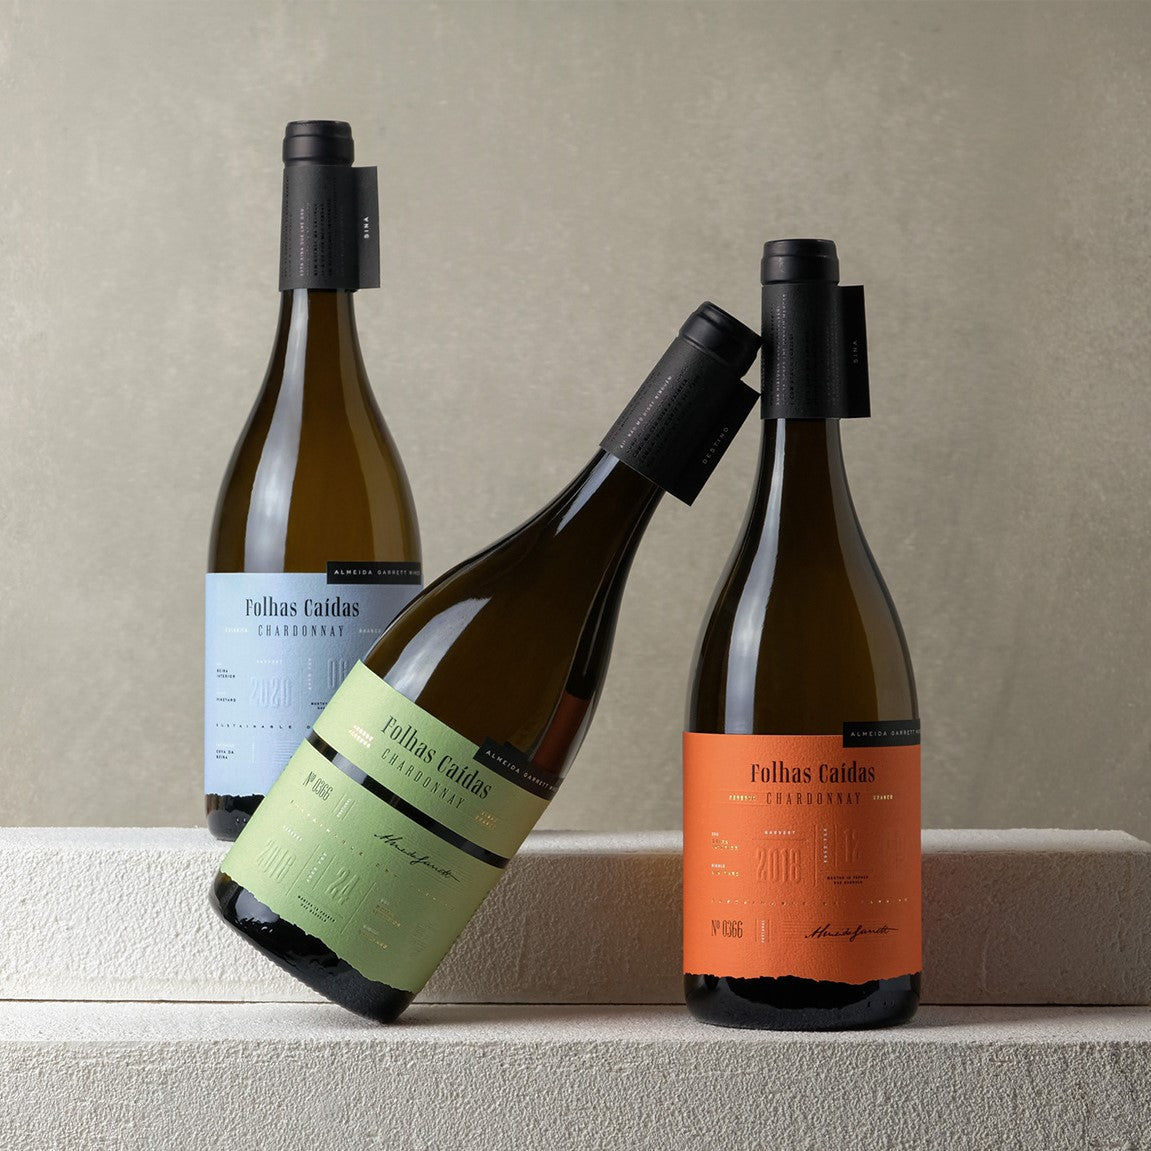 21 Eye-Catching Wine Bottle Designs to Inspire Your Own Brand